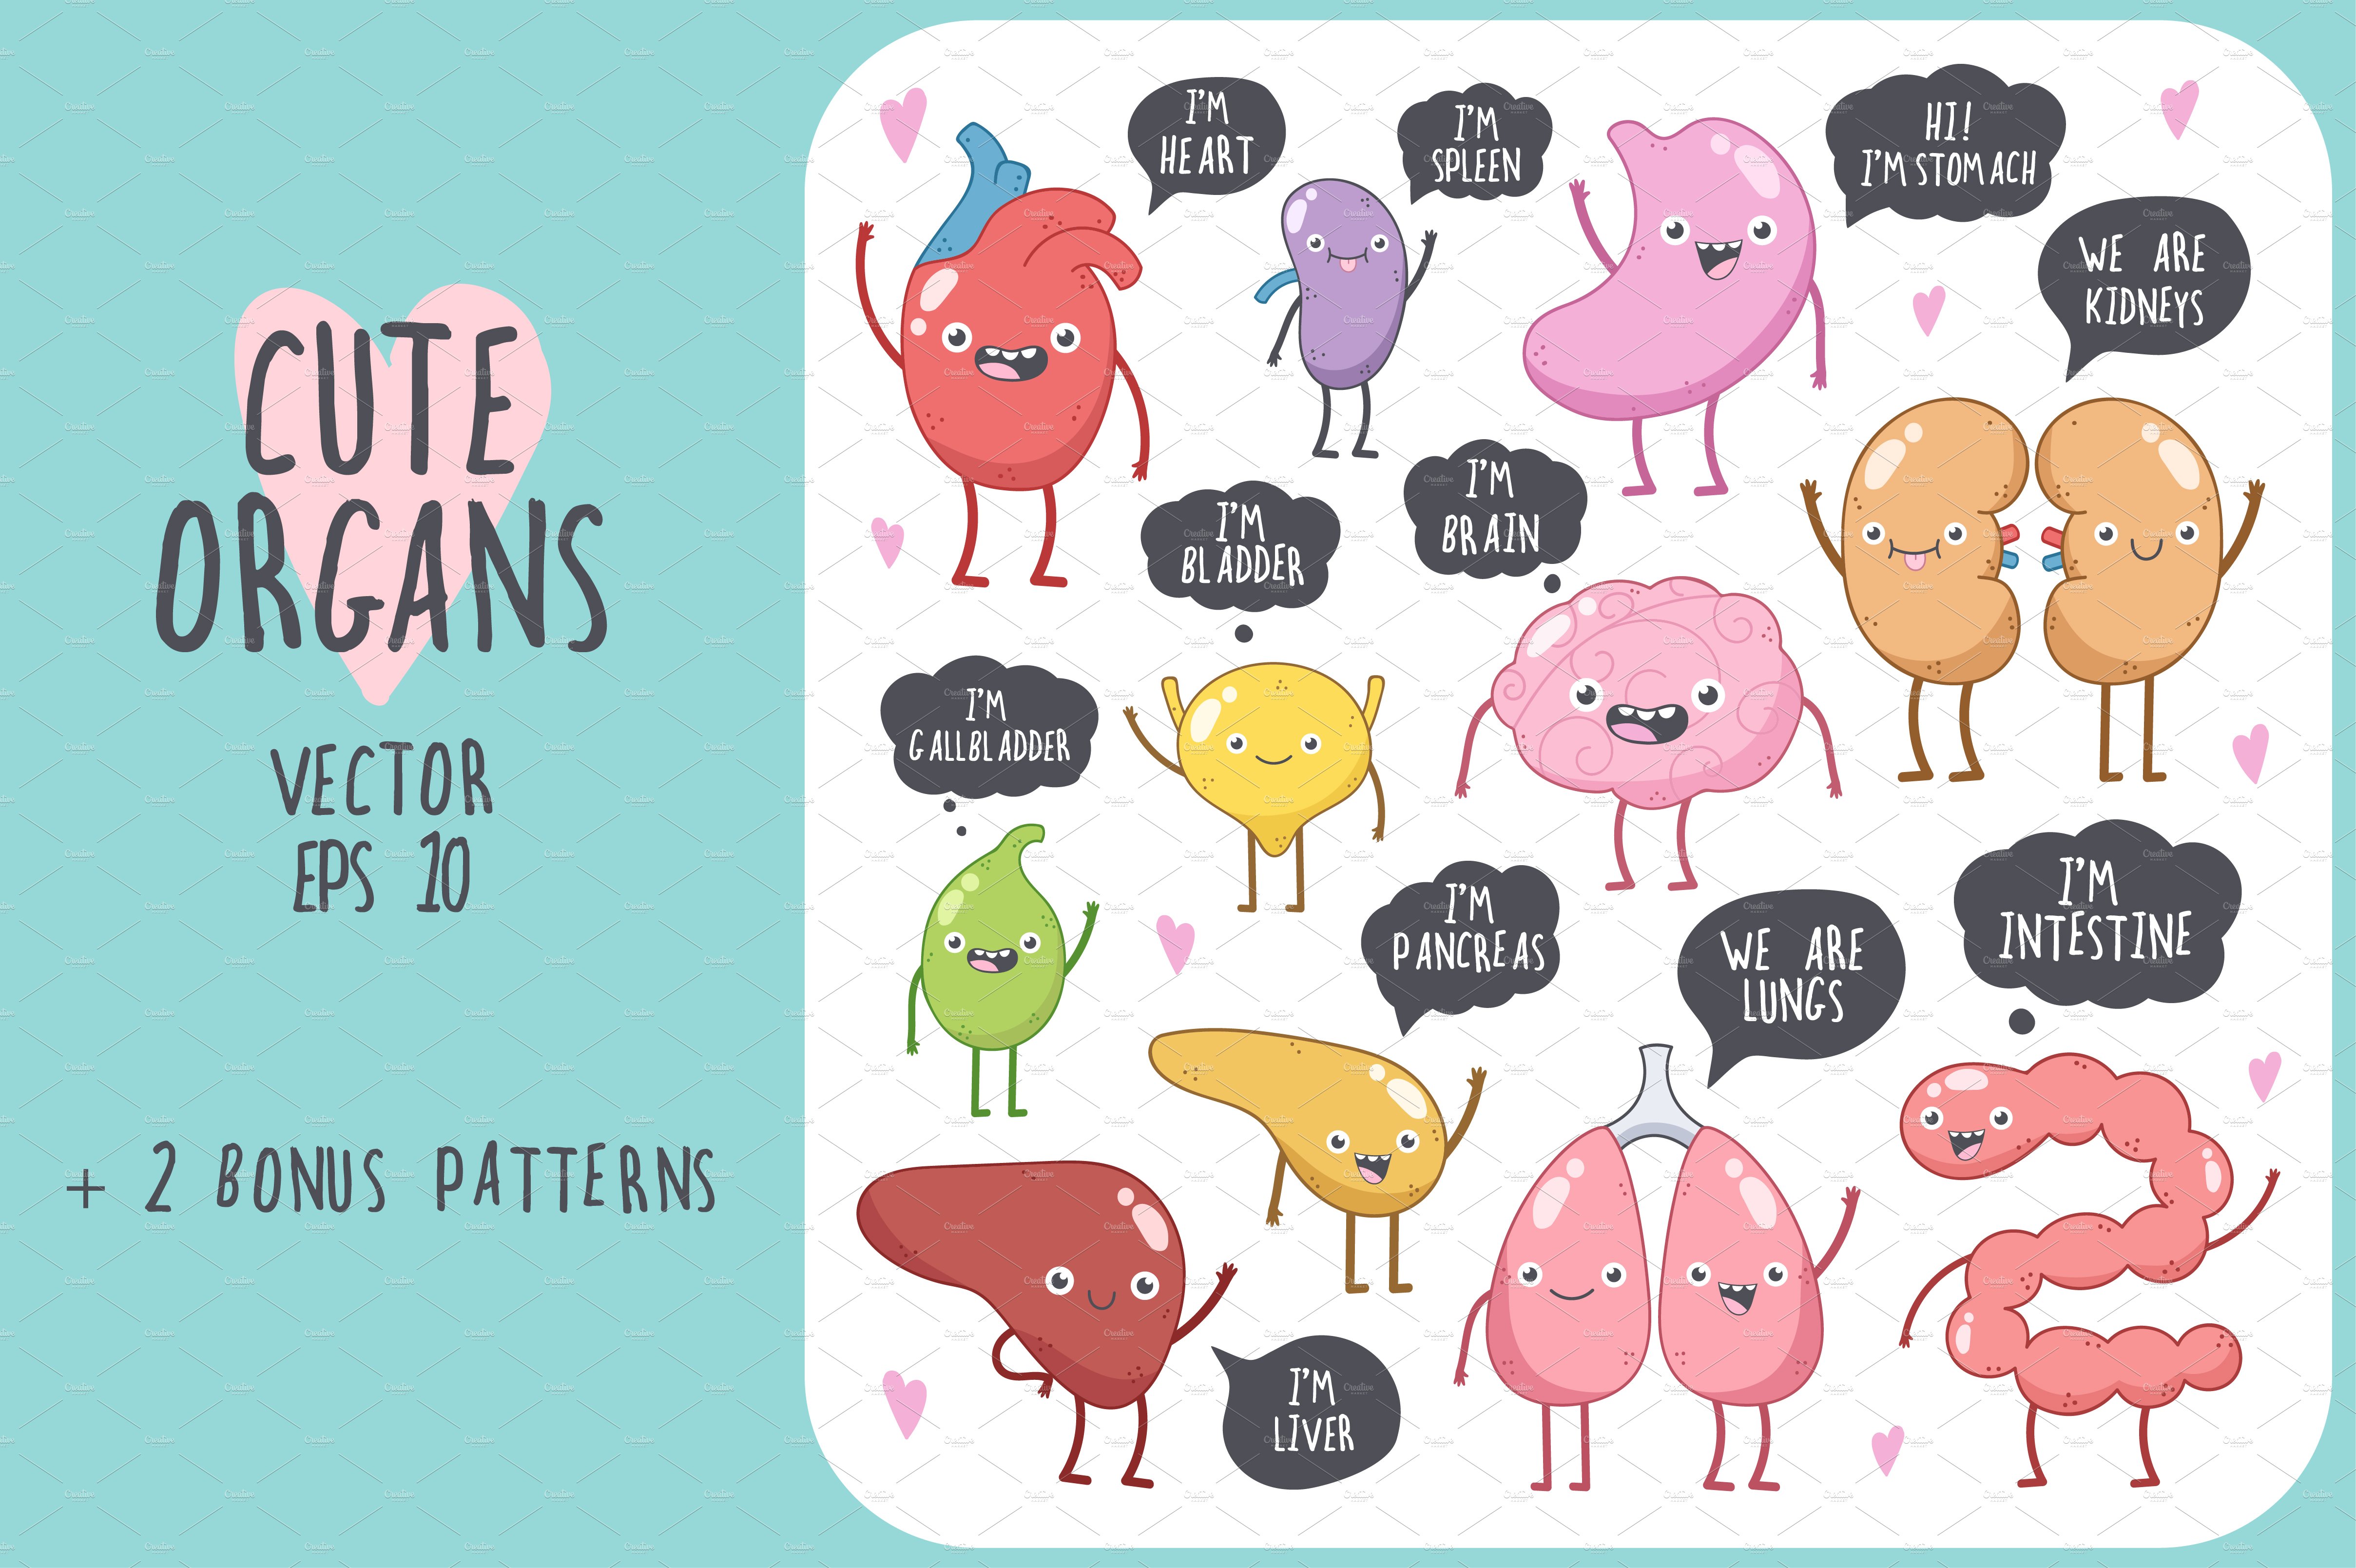 Cute Organs preview image.